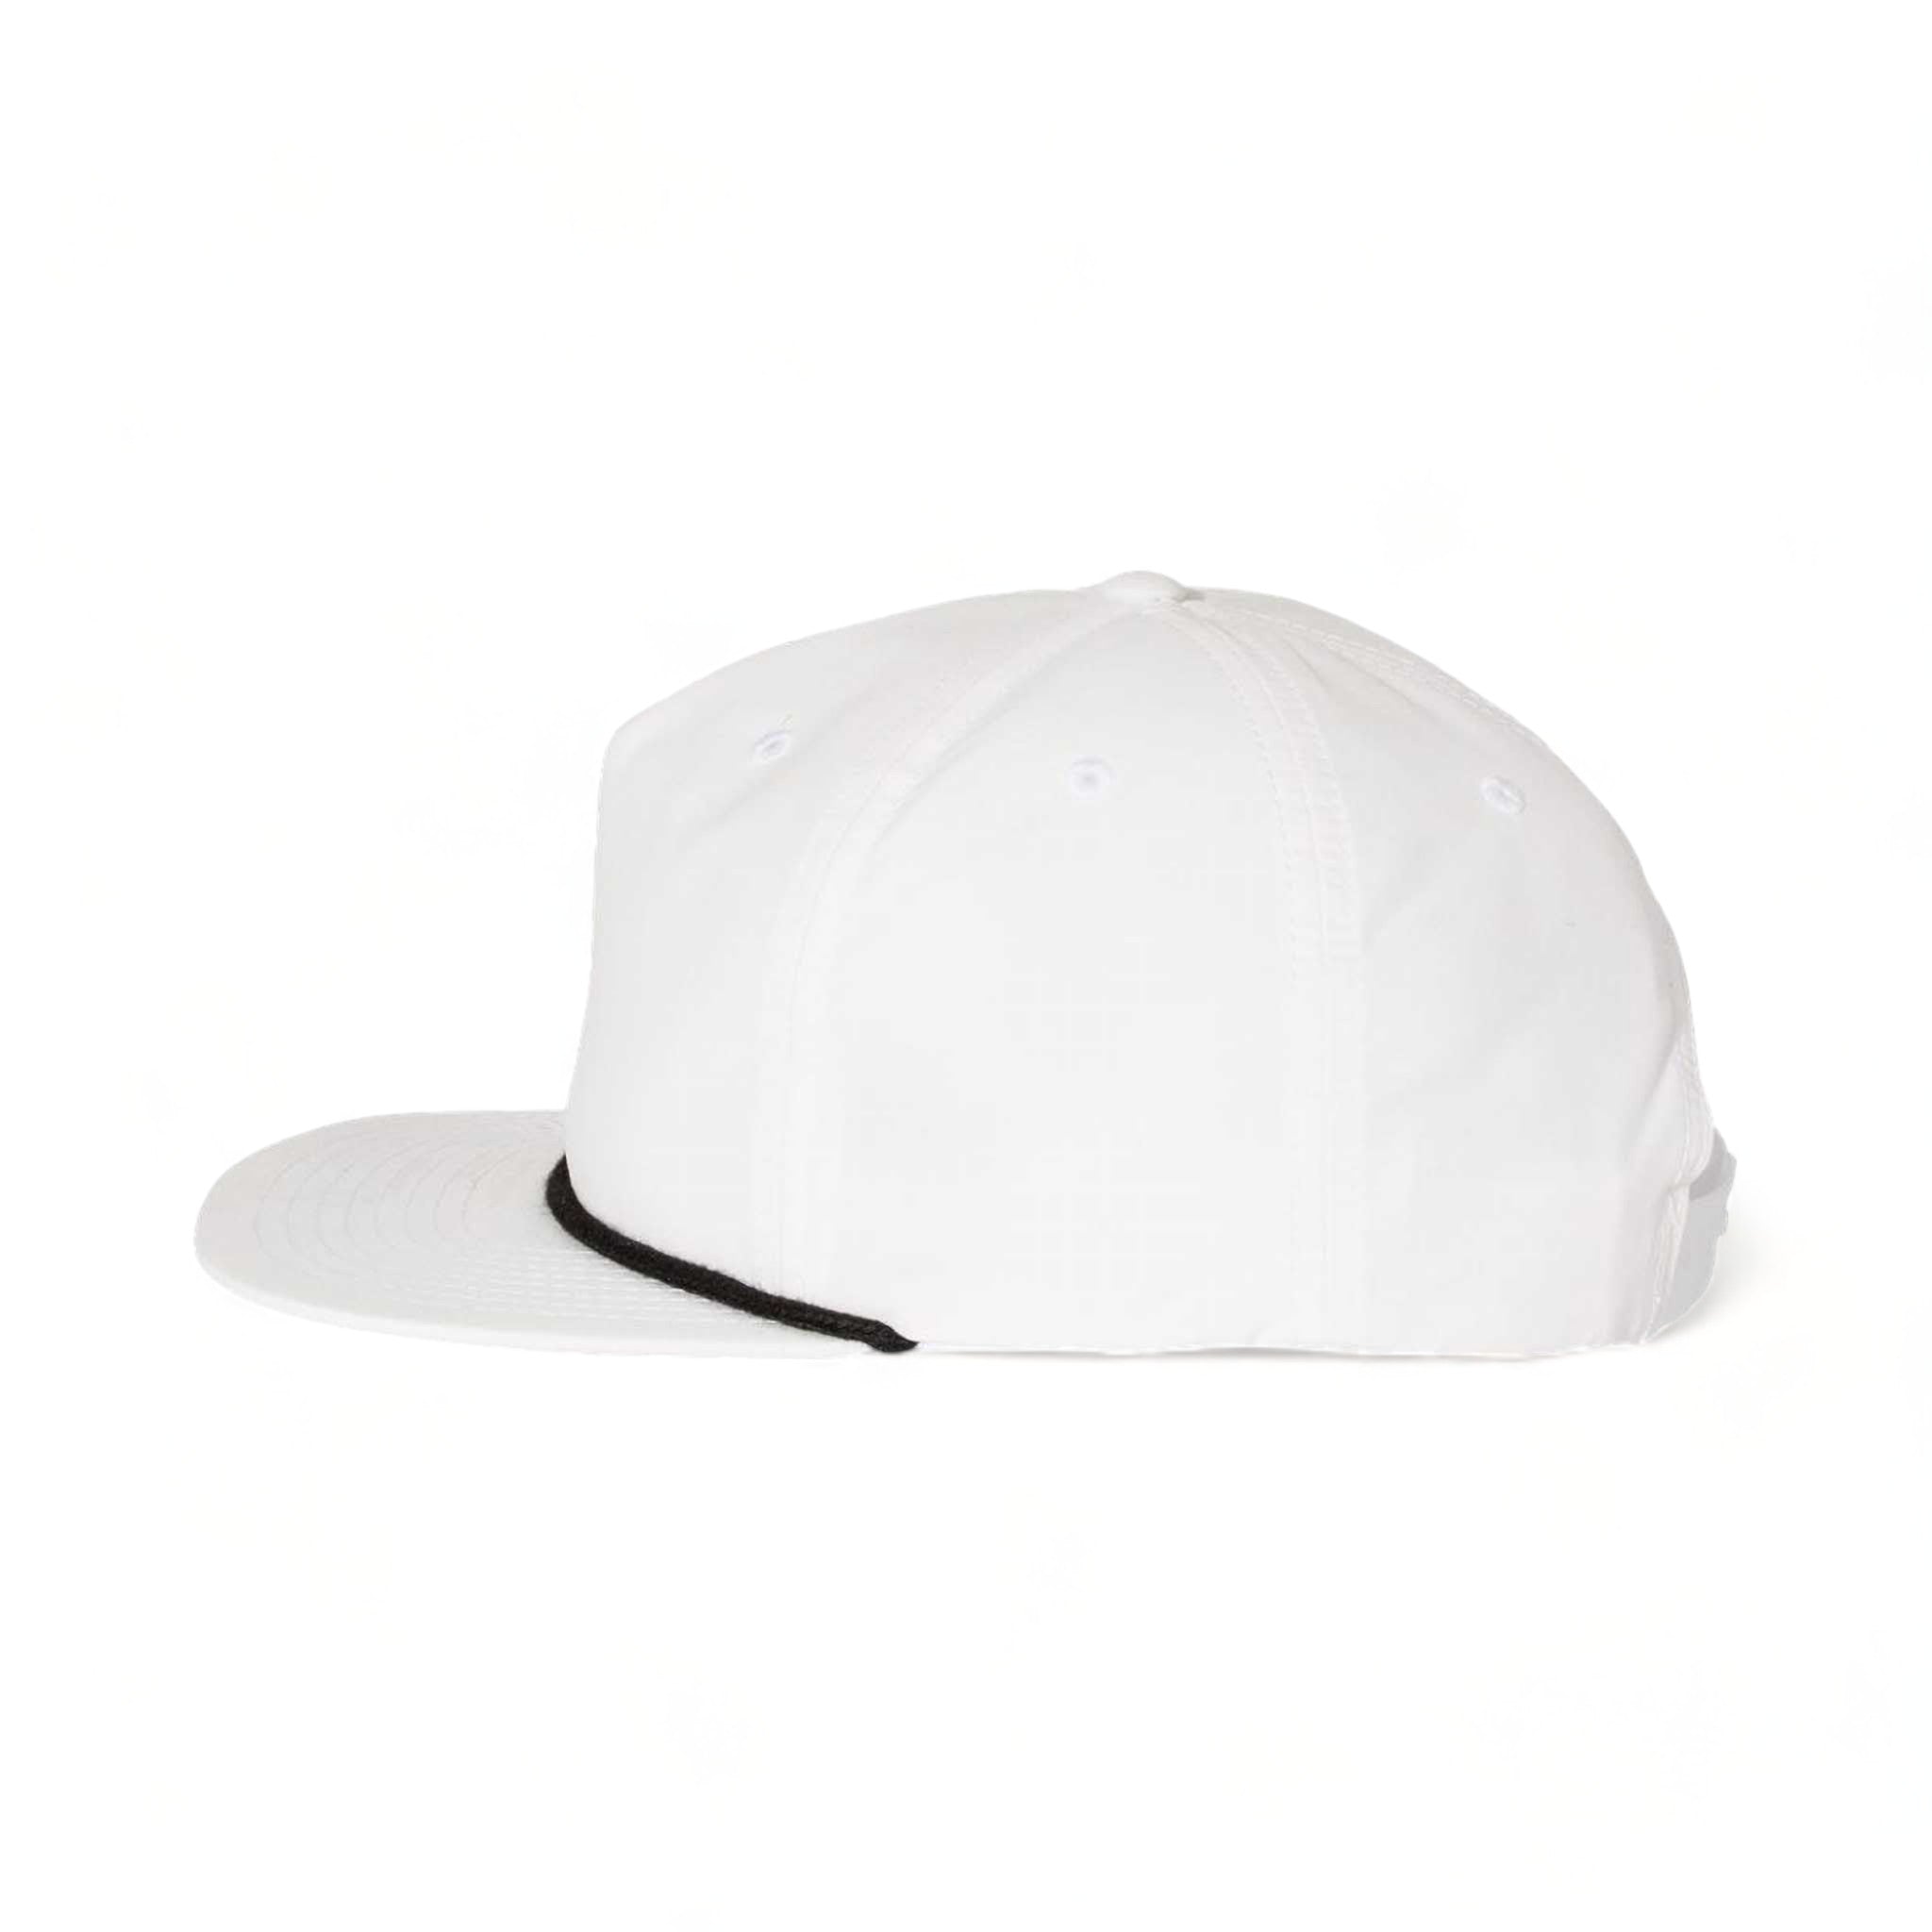 Side view of Richardson 256 custom hat in white and black